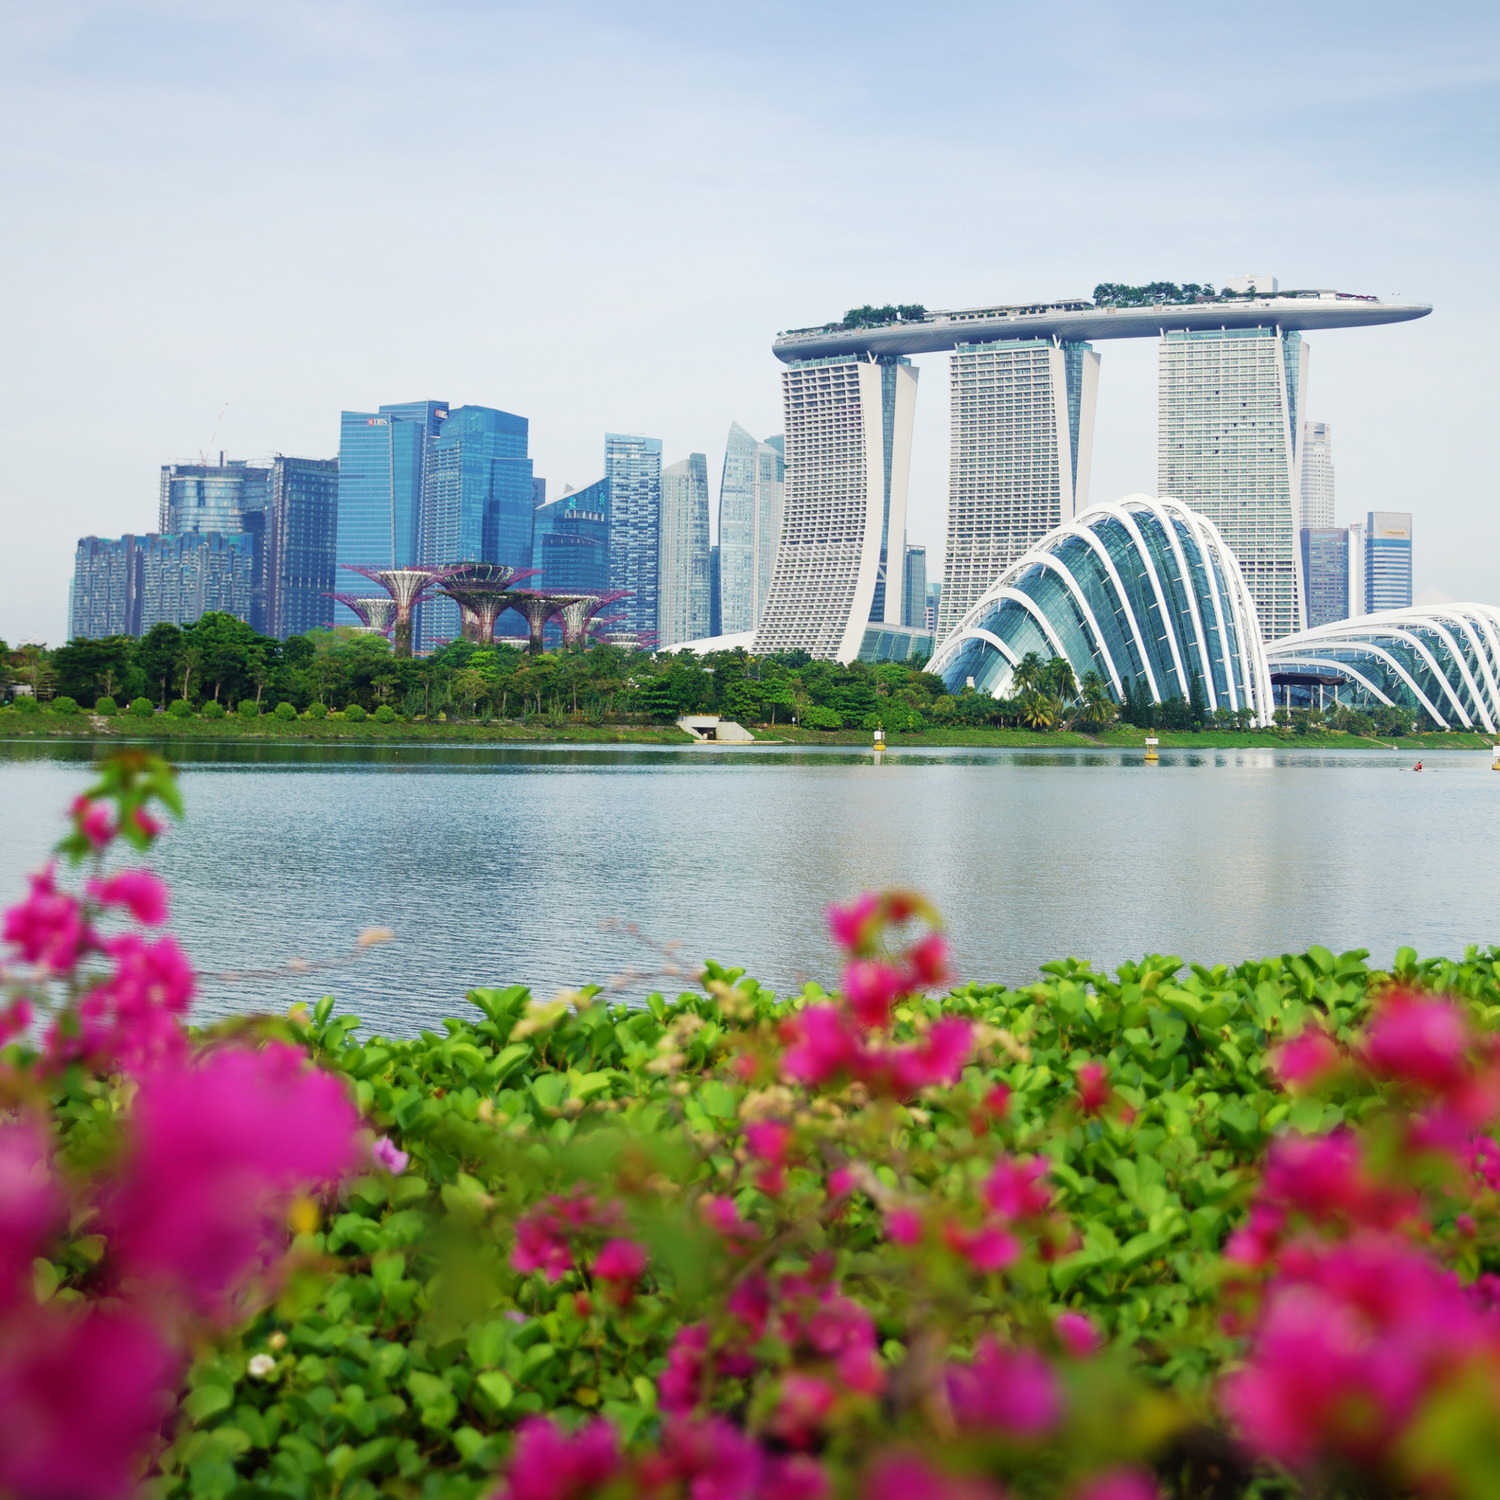 Sights & Souvenirs: Where to visit in Singapore